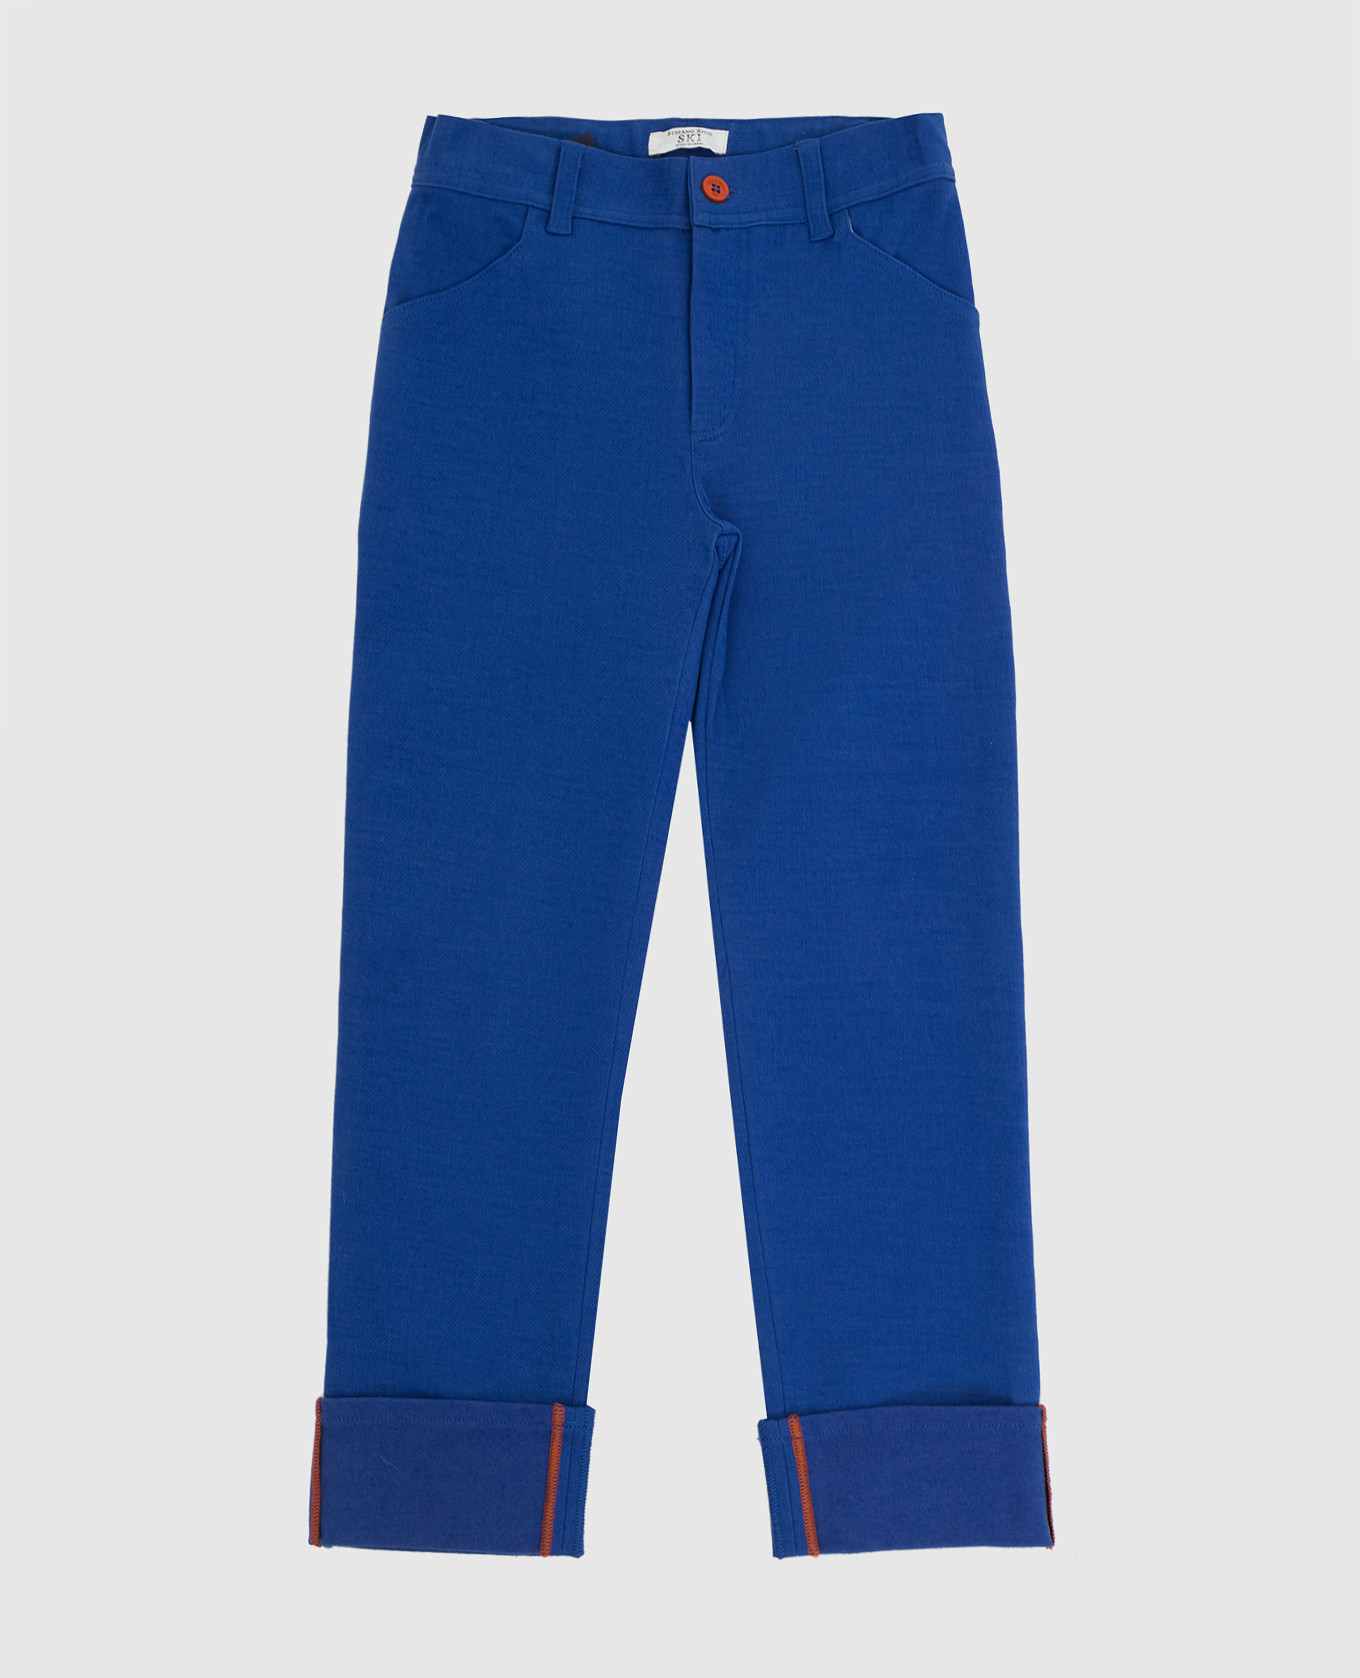 Children's blue trousers with embroidery